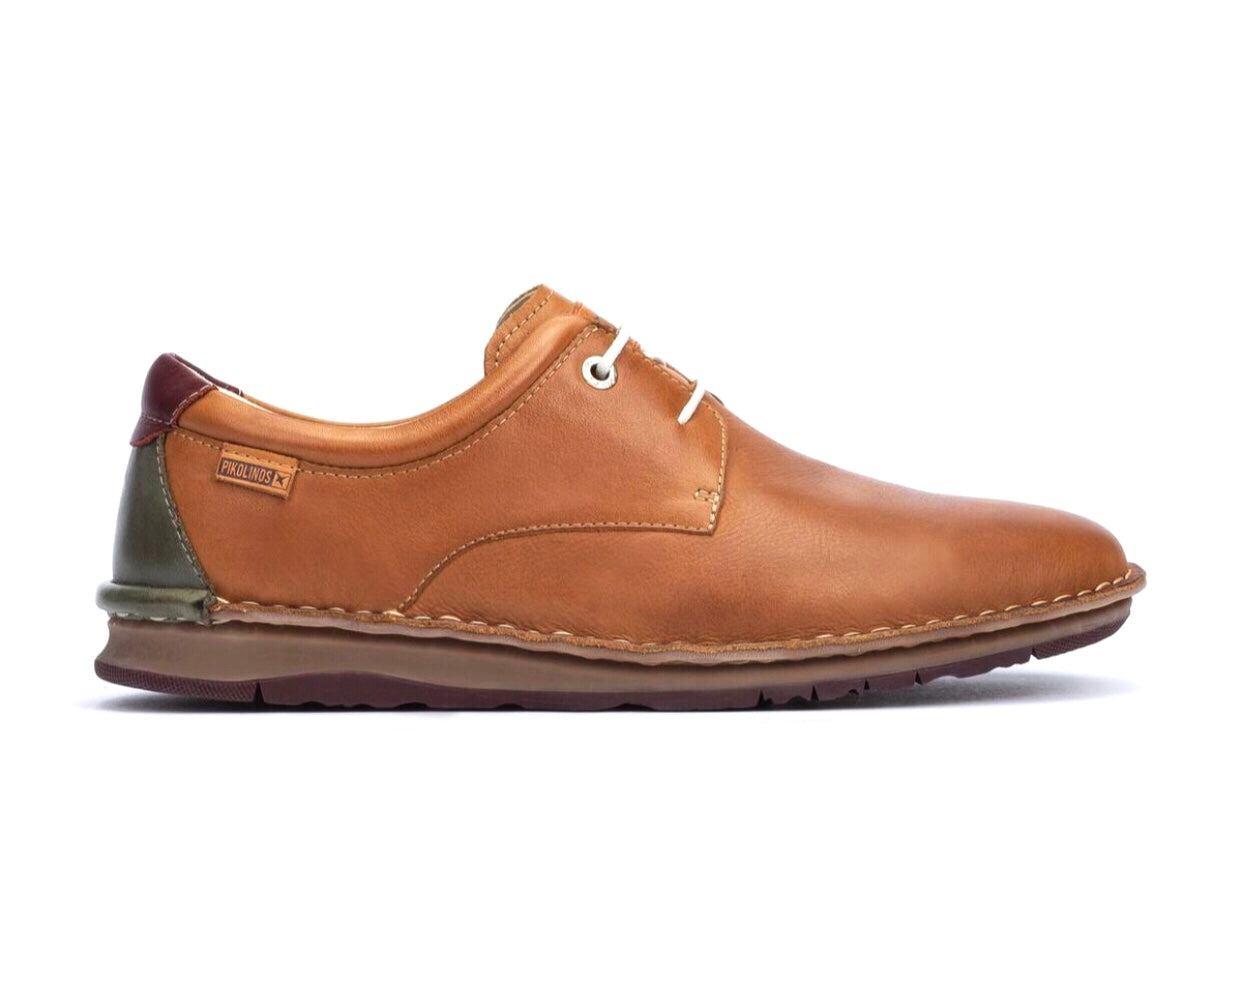 Pikolinos Navas M7T-4036 Brandy 2 Eyelet Shoe Made In Spain – Redpath Shoes  Canberra